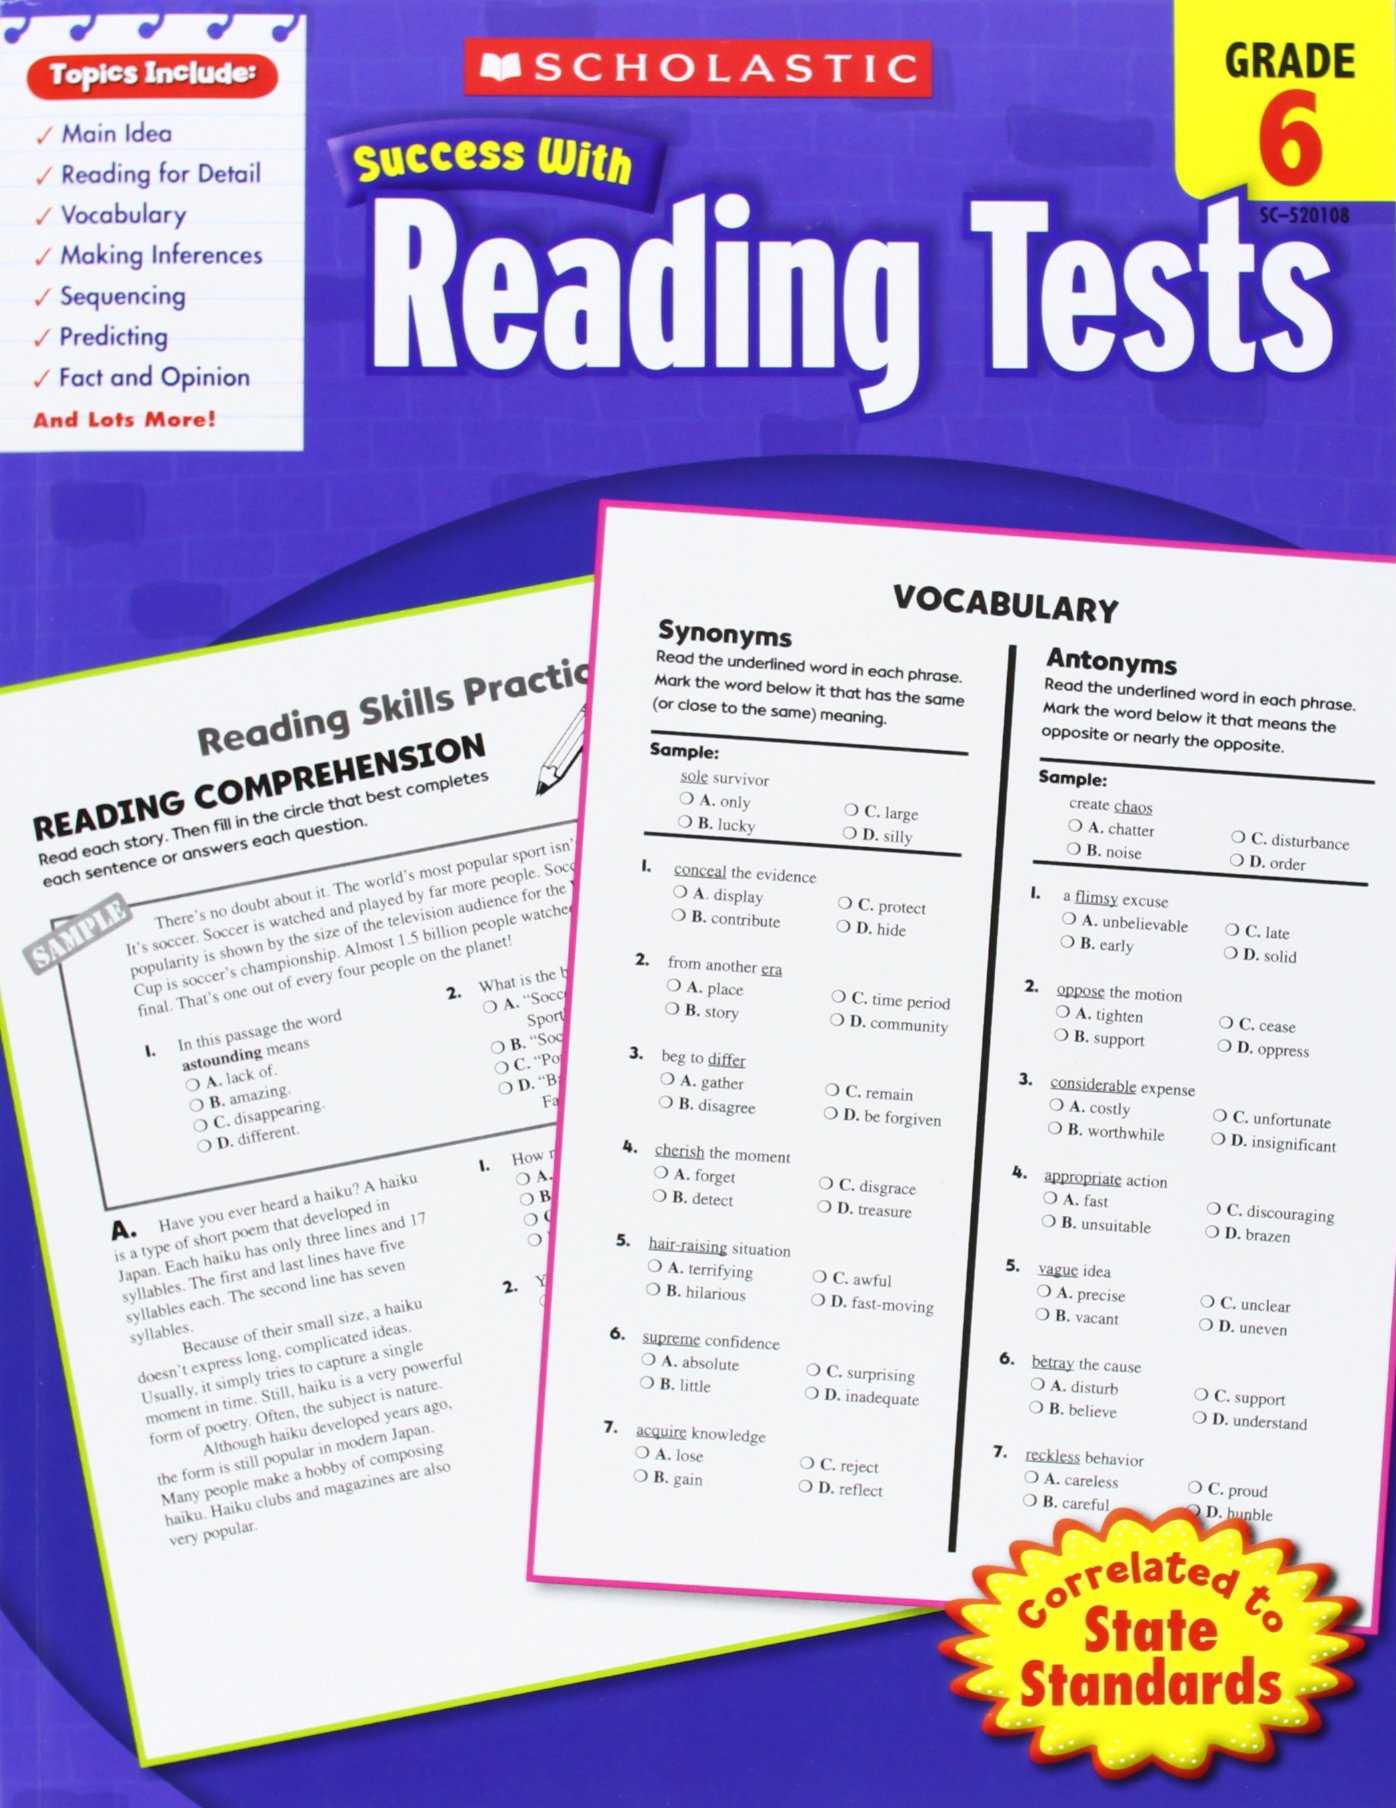 9 11 Reading Comprehension Worksheets Along with Amazon Scholastic Success with Reading Tests Grade 6